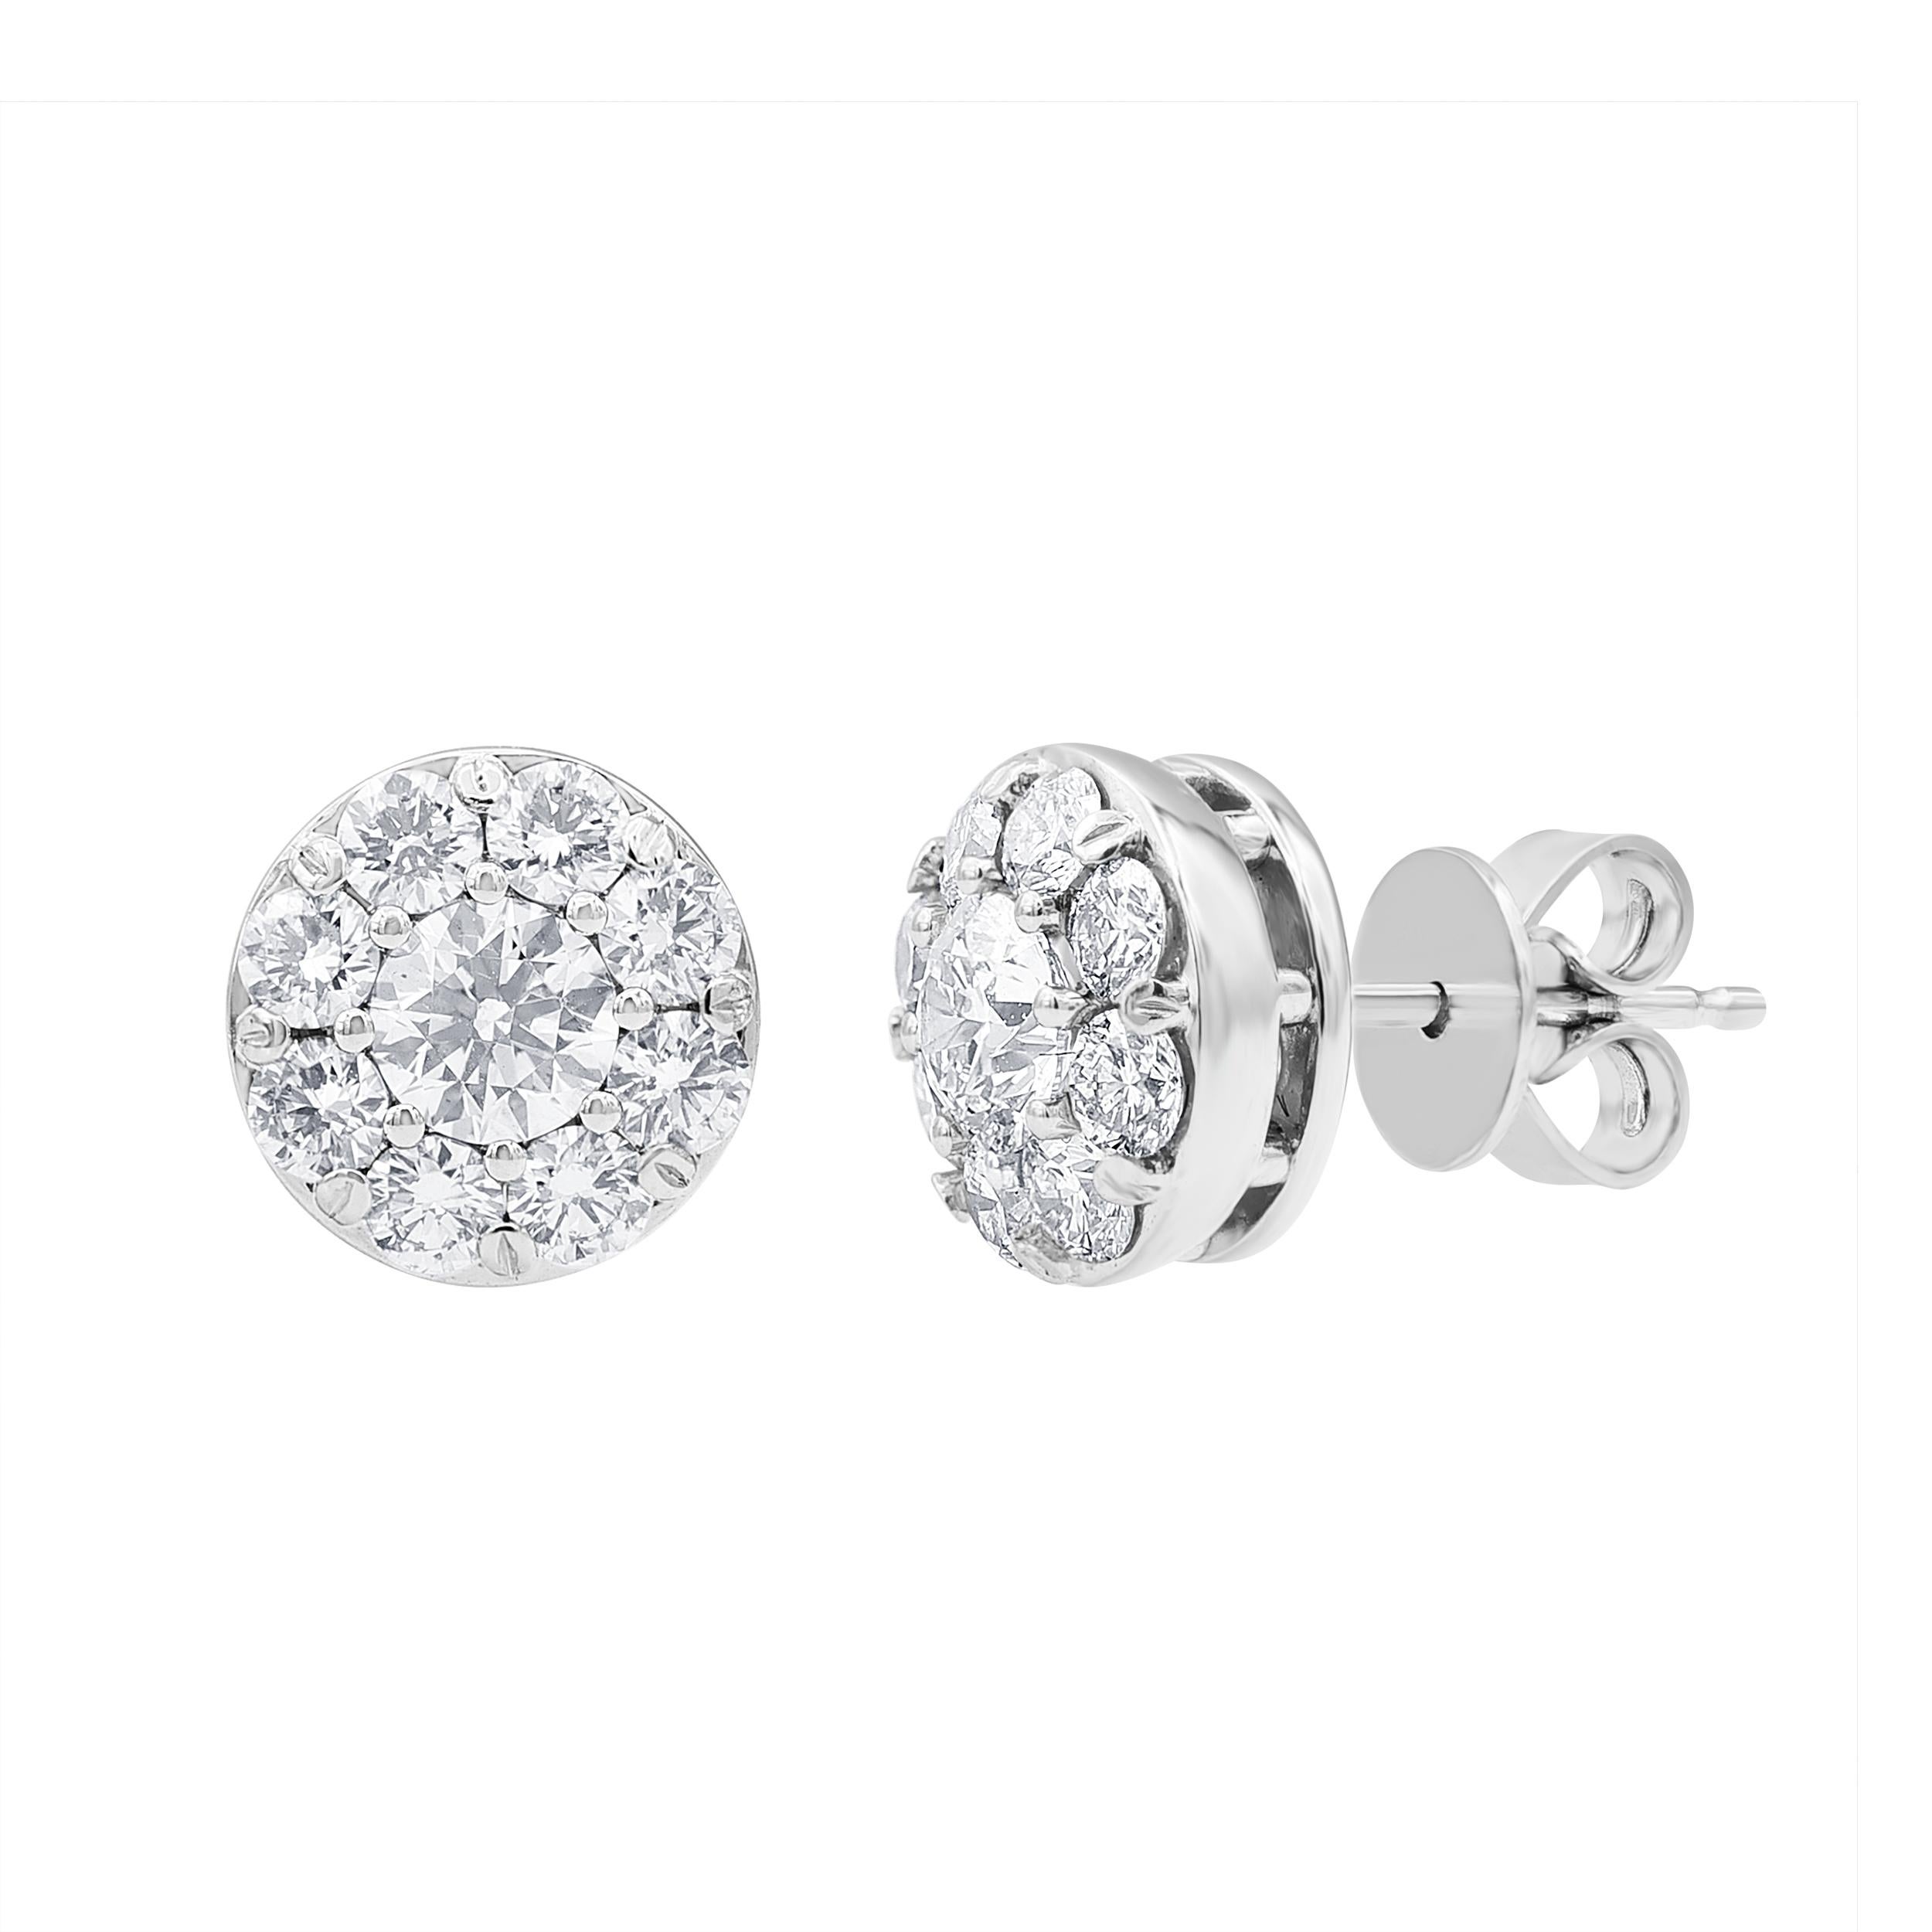 A bright addition to any attire, these diamond stud earrings create a sensation. Crafted in 14K white gold, each earring showcases a sparkling 3/4 ct.  boasting a color rank of H and clarity of VS - wrapped in a frame of petite diamonds. Captivating